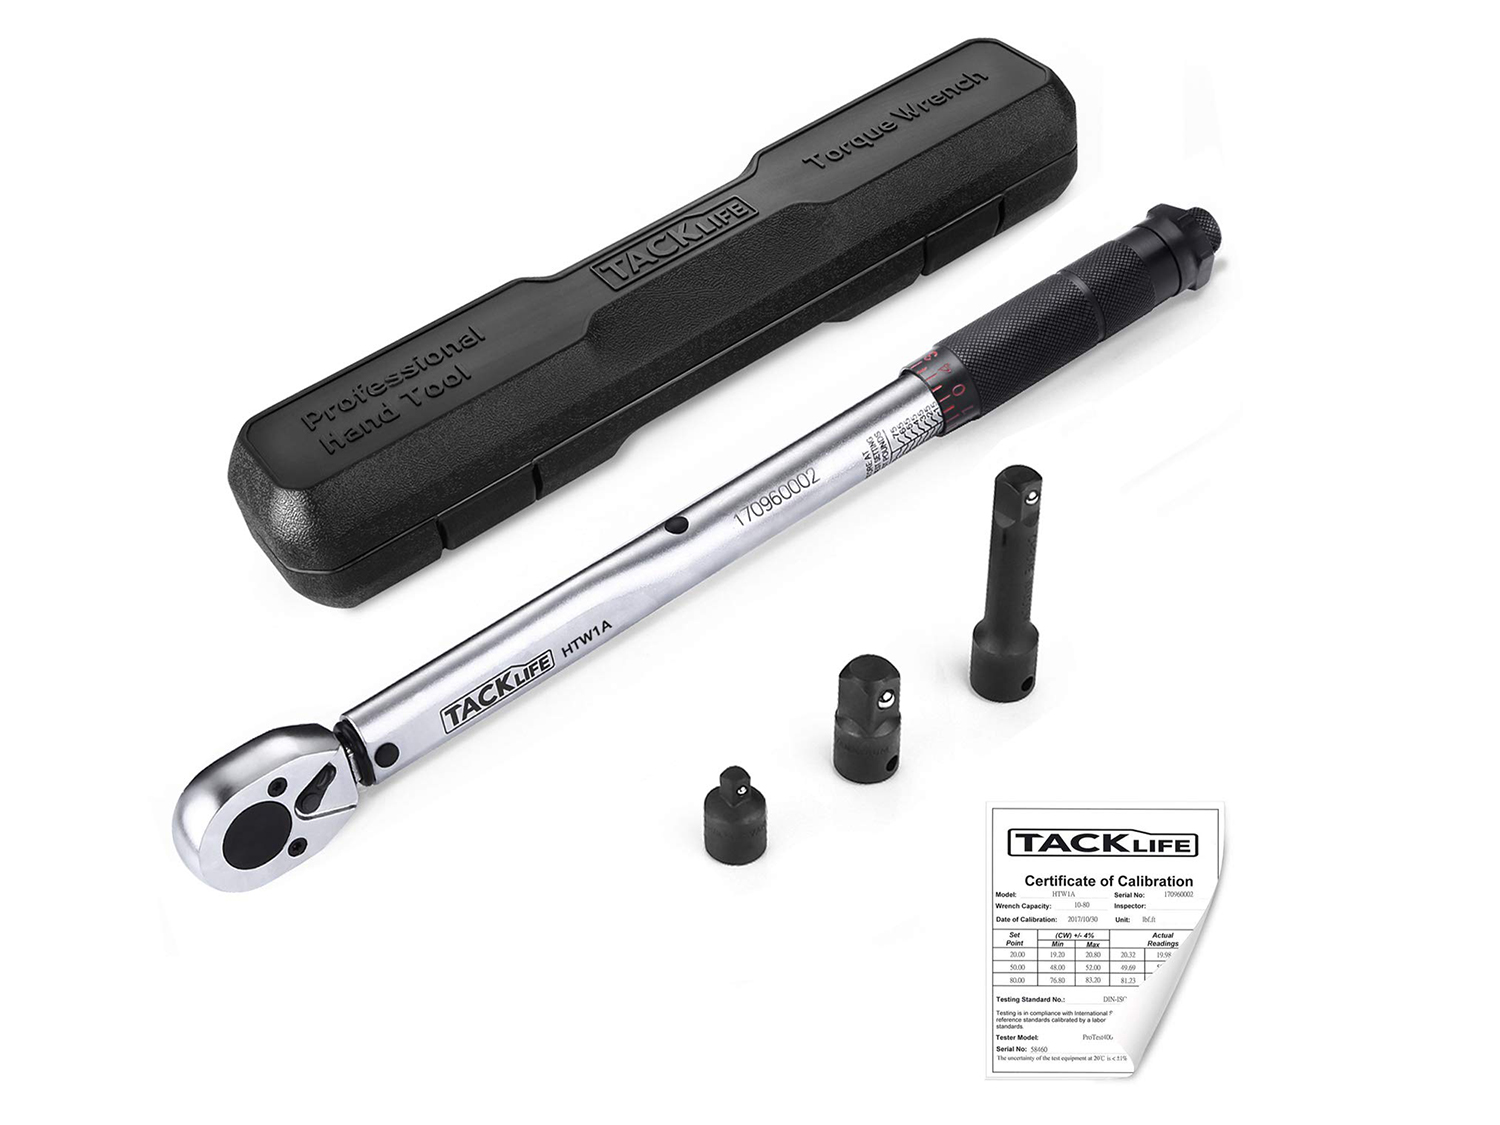 18pcs/Set Bicycle Repair Tools Kit Adjustable Ratchet Torque Wrench Extension Rod Bit High Precision Spanner 2-15nm 2-20nm 